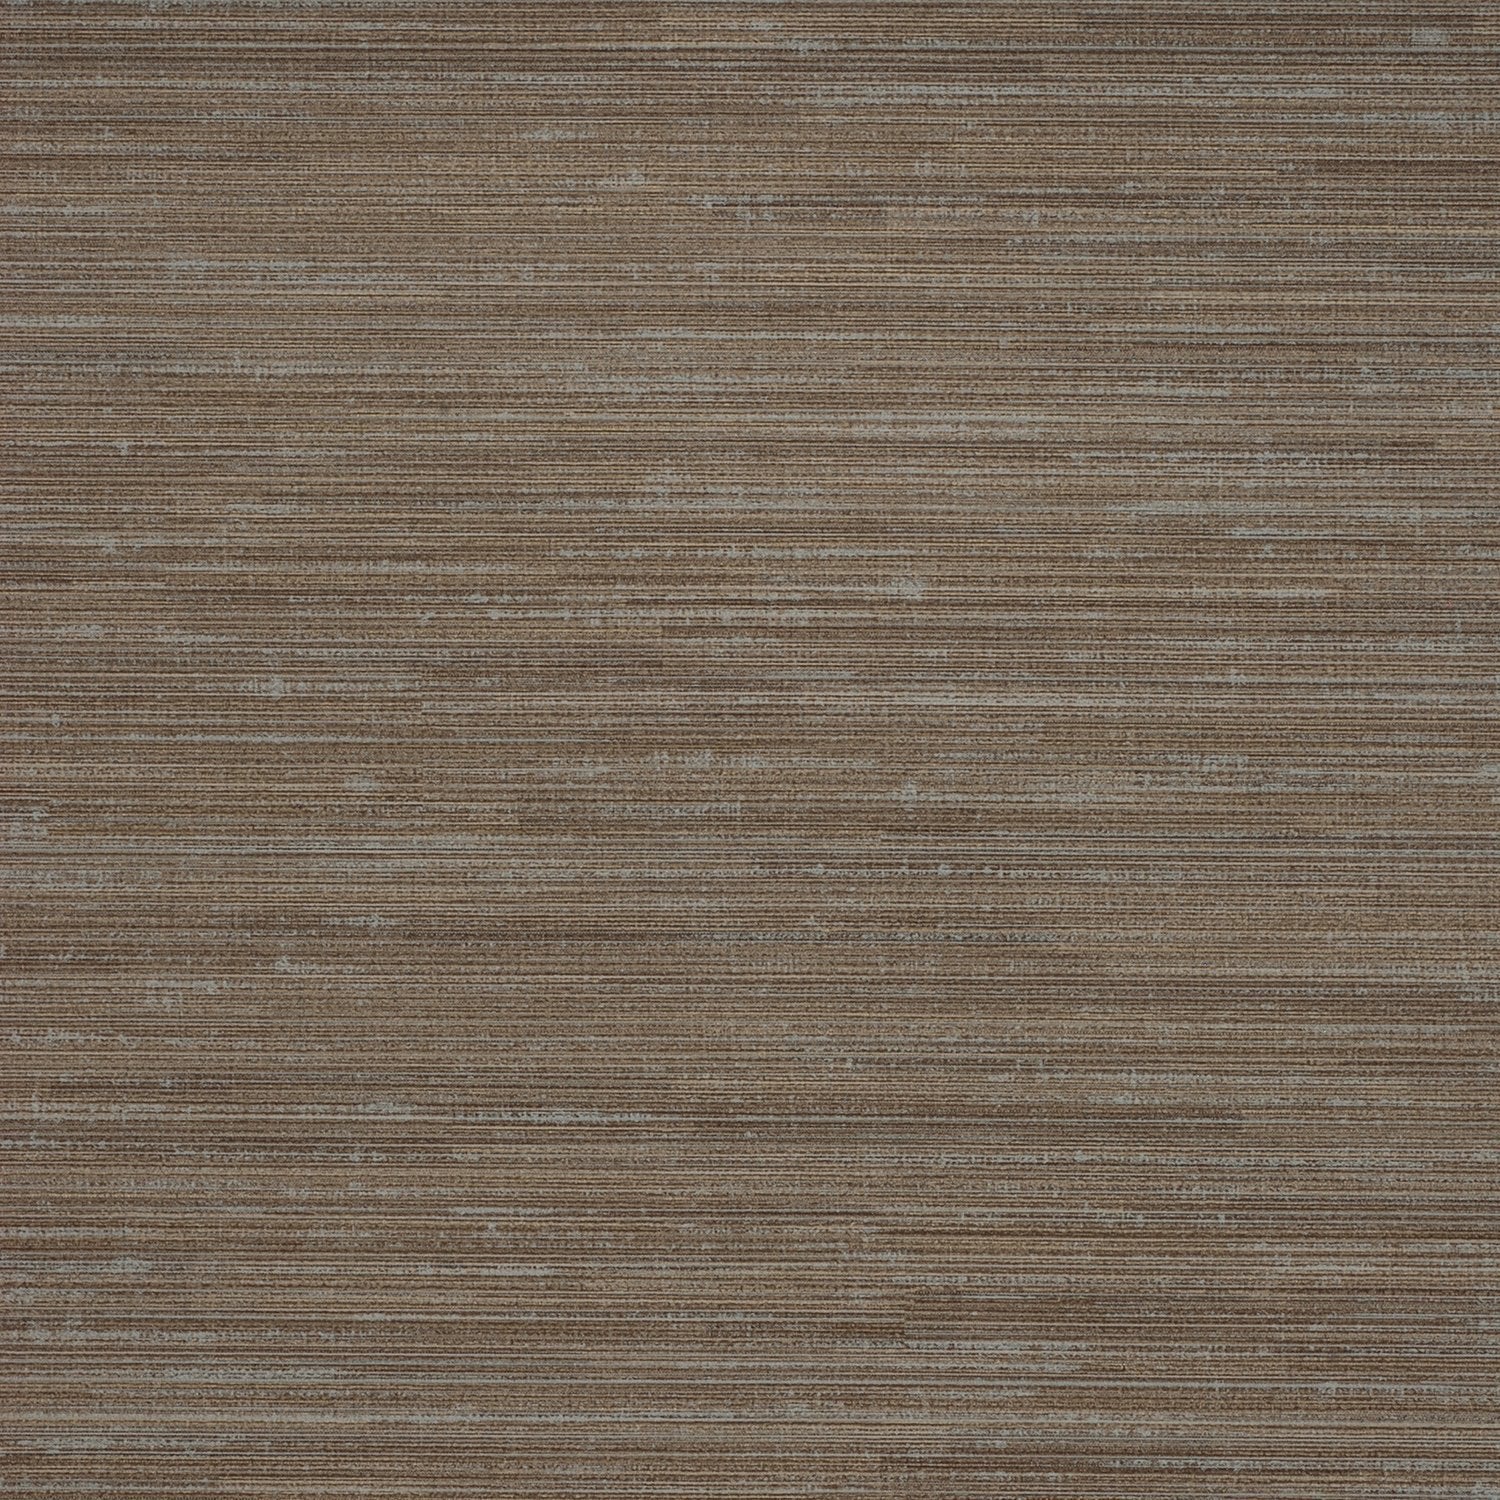 Casbah Silk - Y46486 - Wallcovering - Vycon - Kube Contract